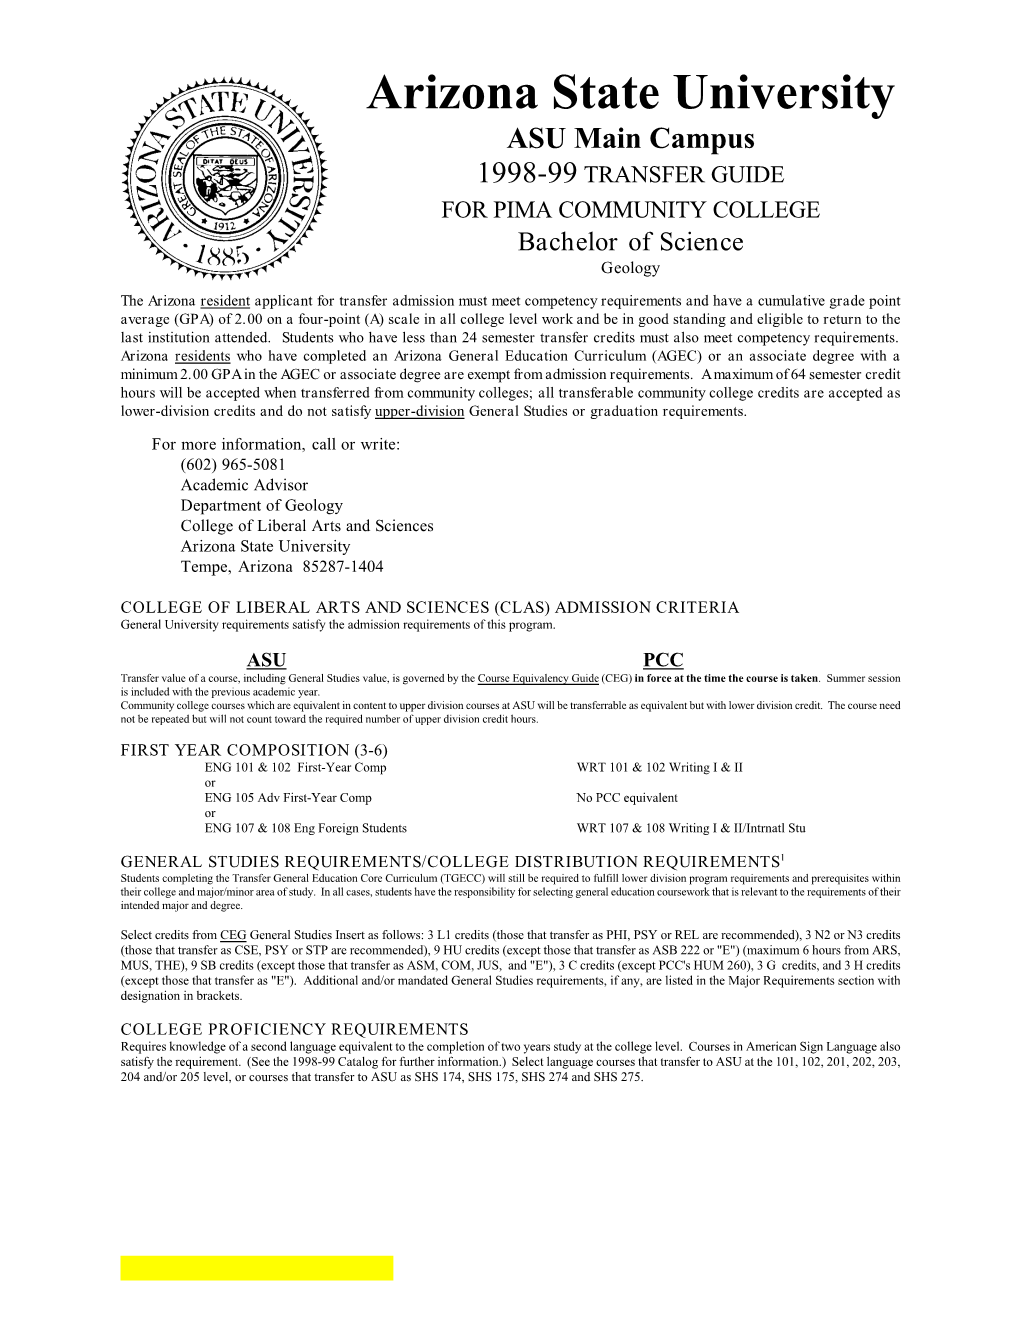 Geology Transfer Guides for Pima Community College